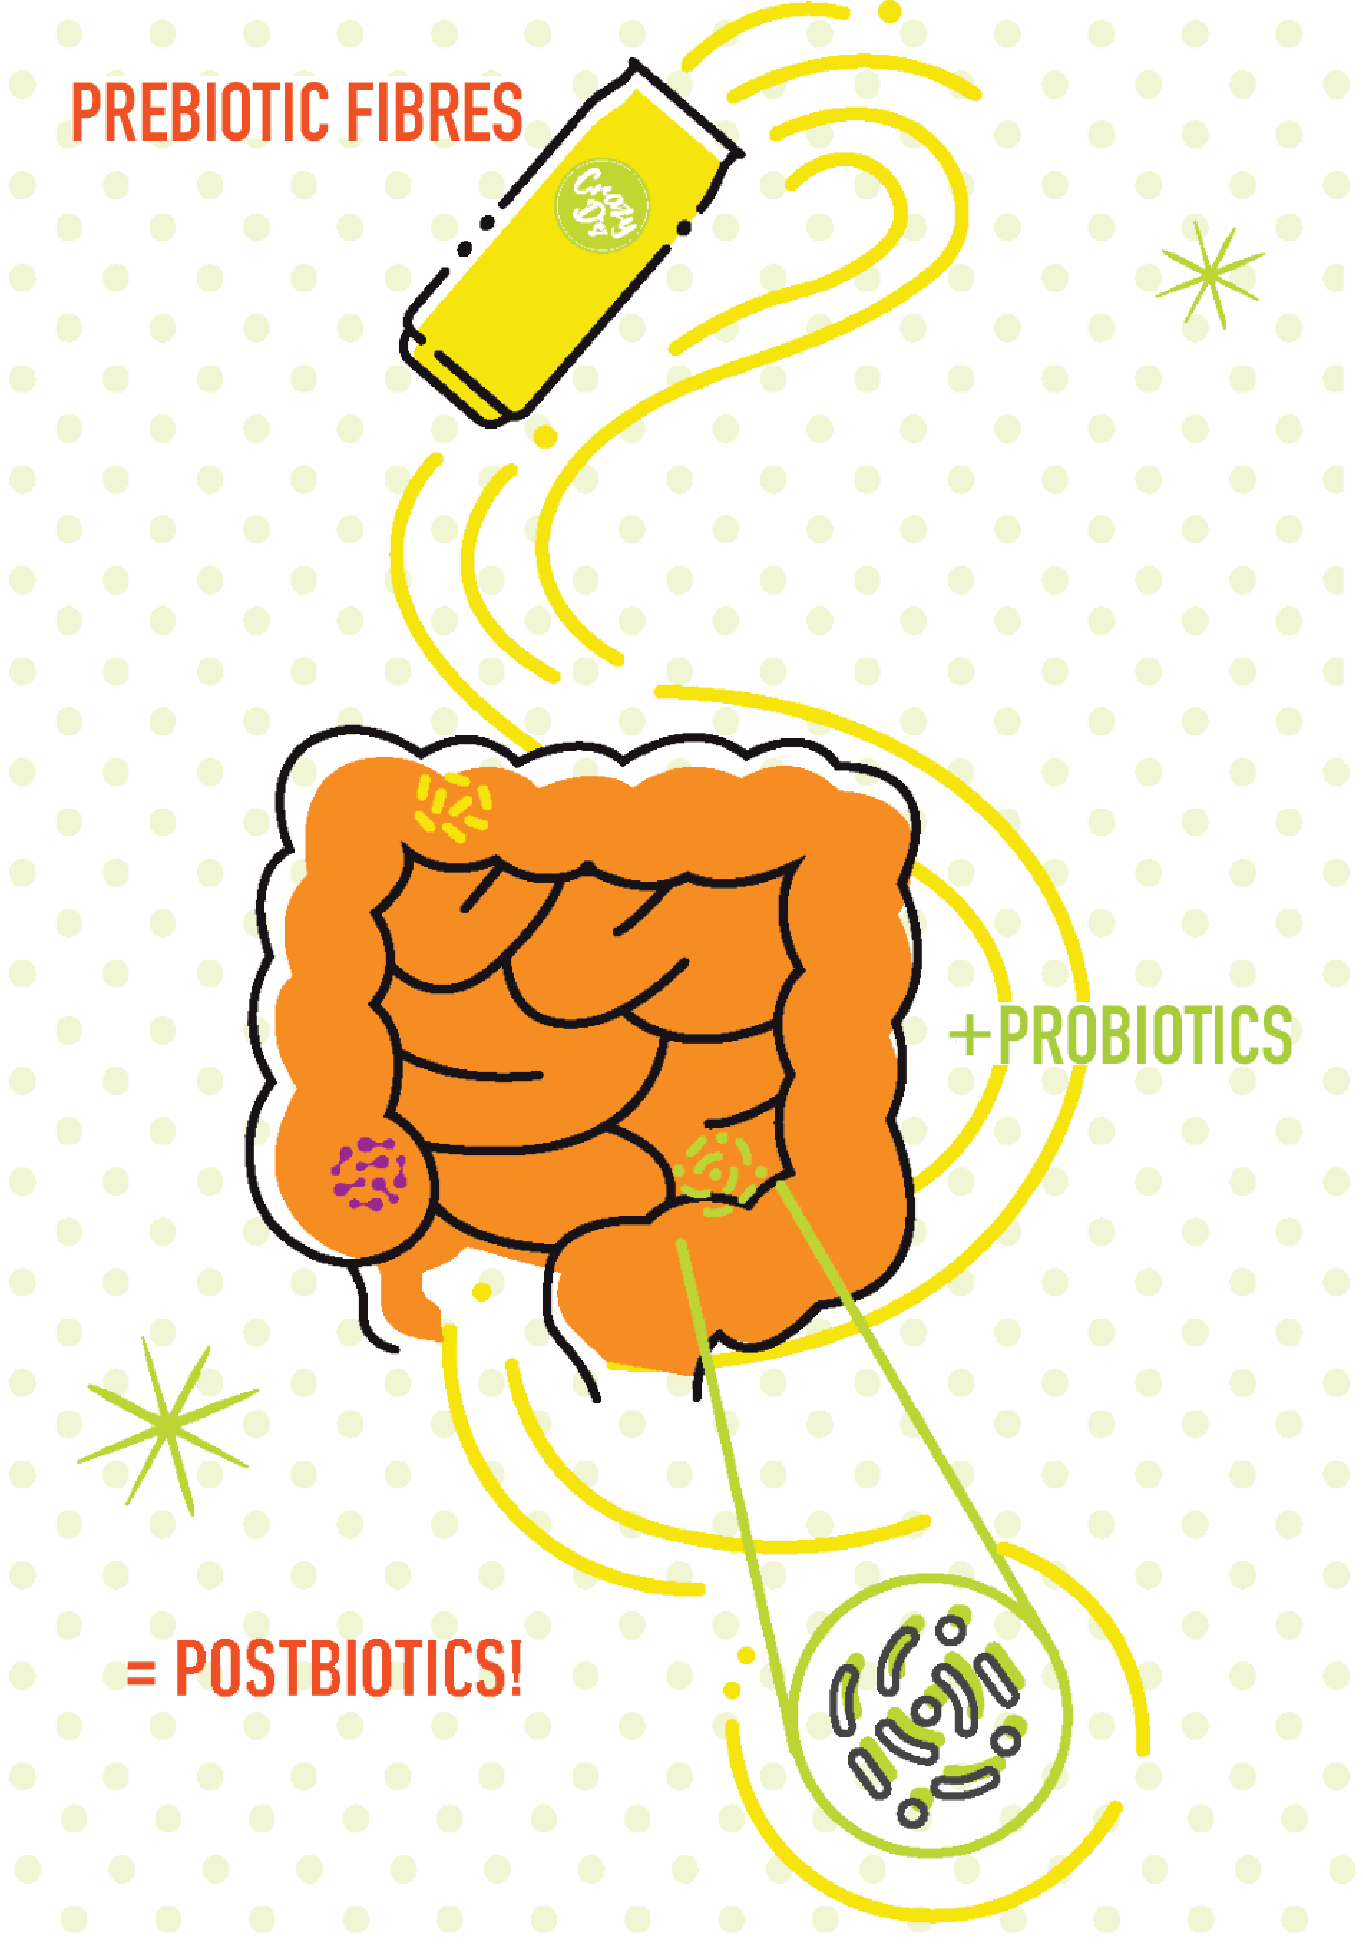 Prebiotics feed your existing probiotics, which results in the natural creation of postbiotics.